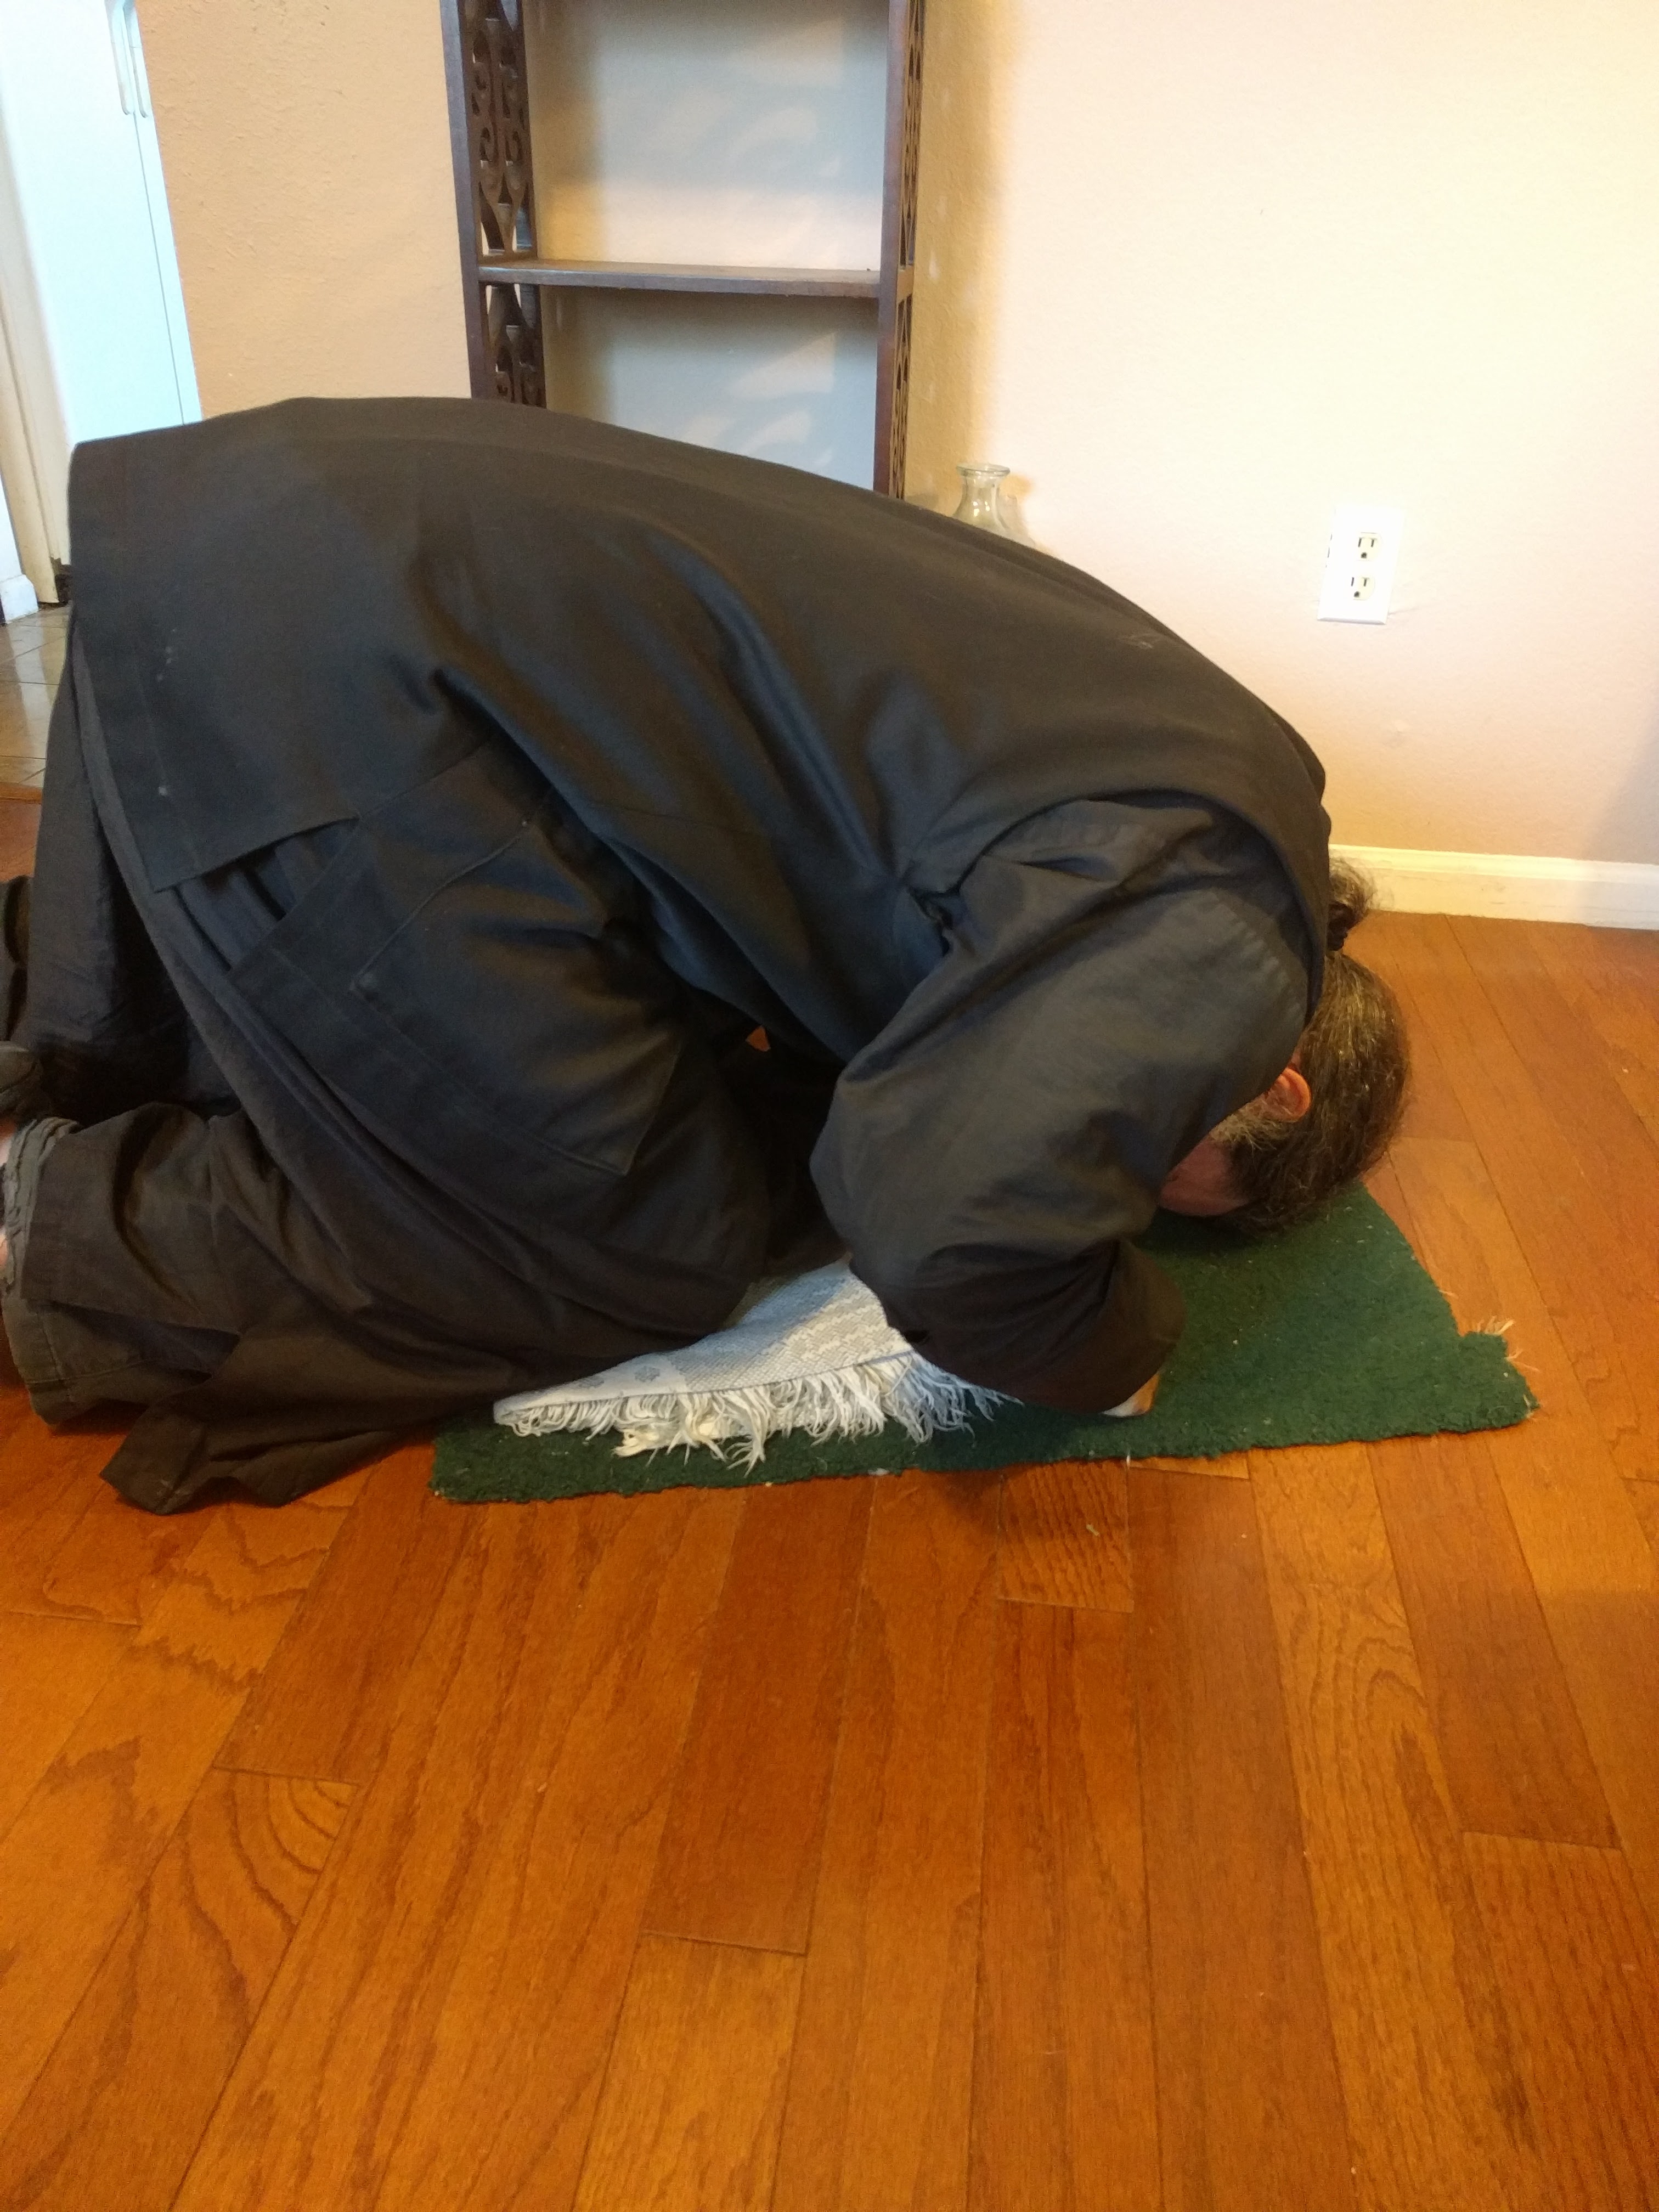 A prostration http://www.orthodox.net/images/prostration.jpg